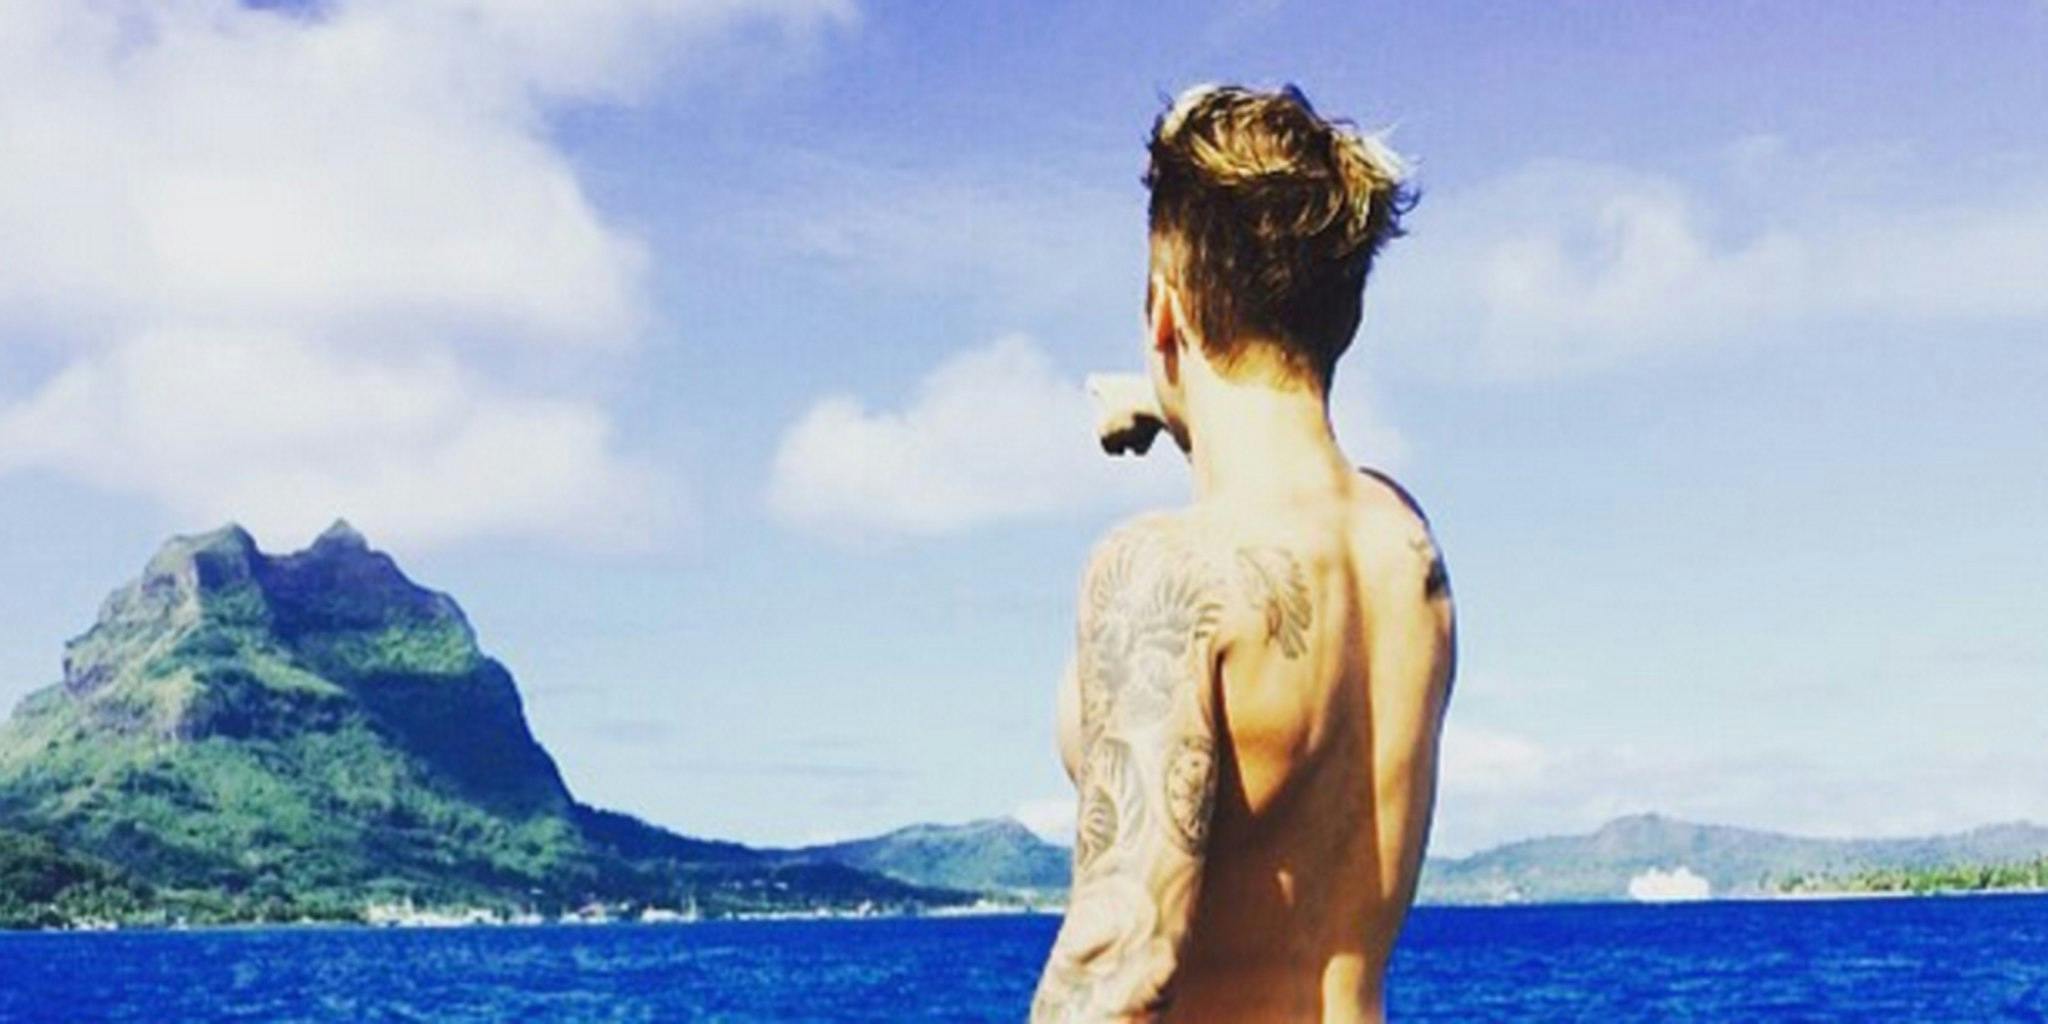 Justin Bieber posted a picture of his butt—and Instagram didn’t have a problem with that